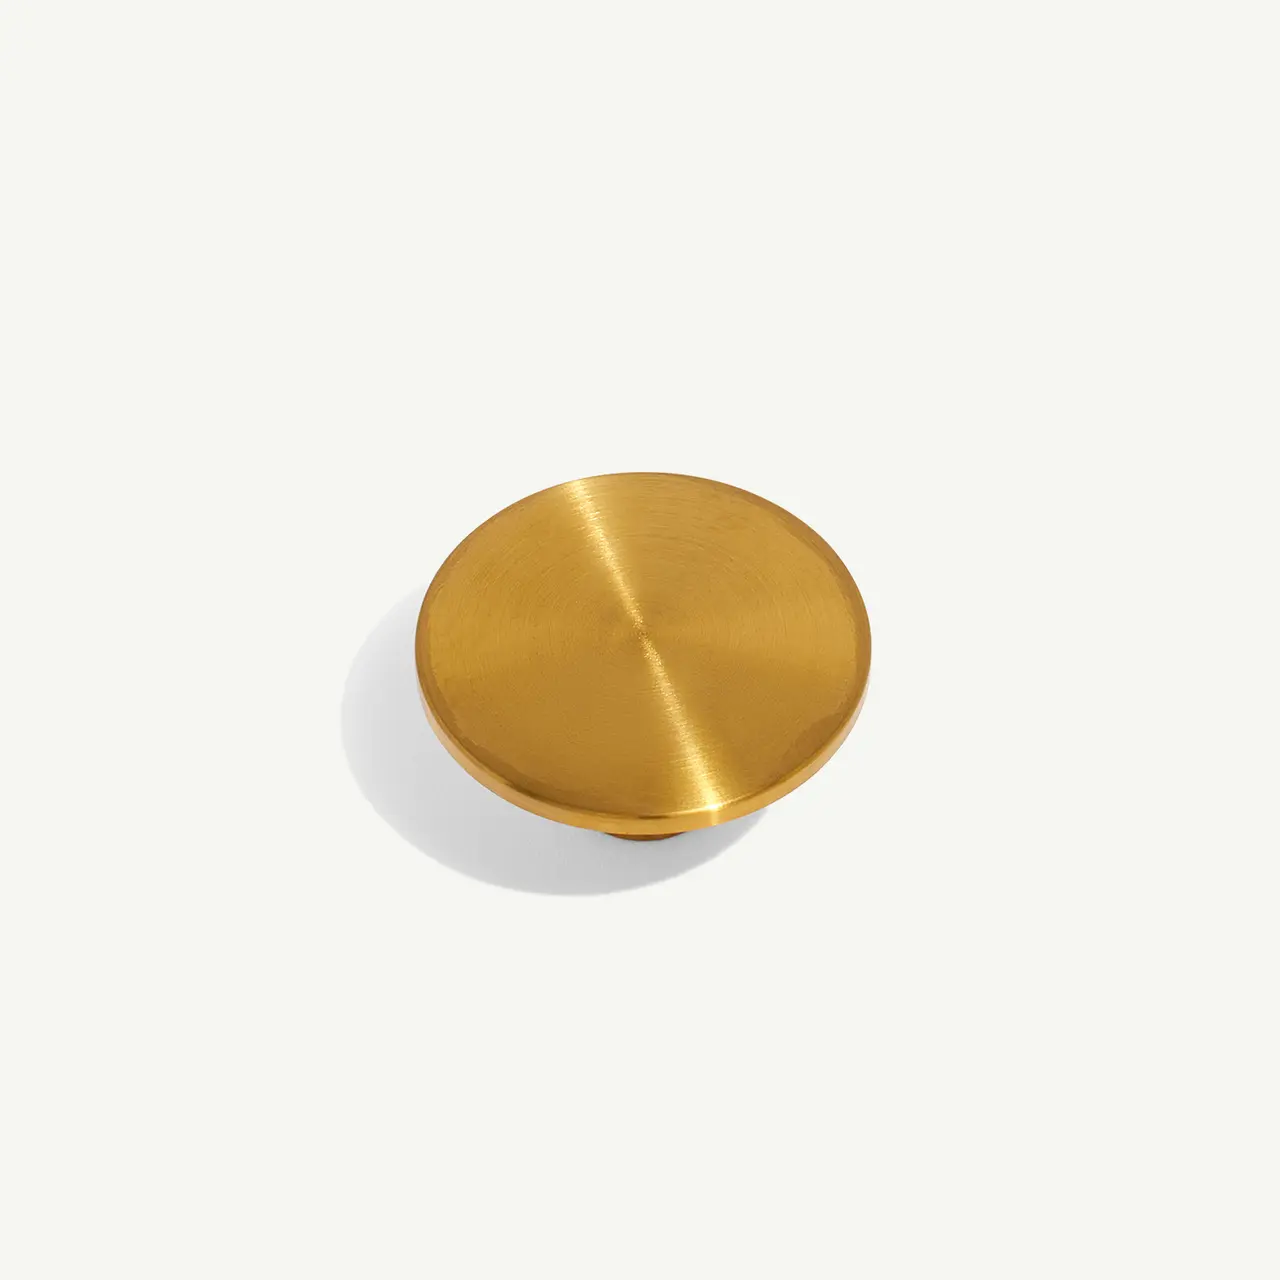 A circular brass knob with a brushed finish is centered on a bright background.